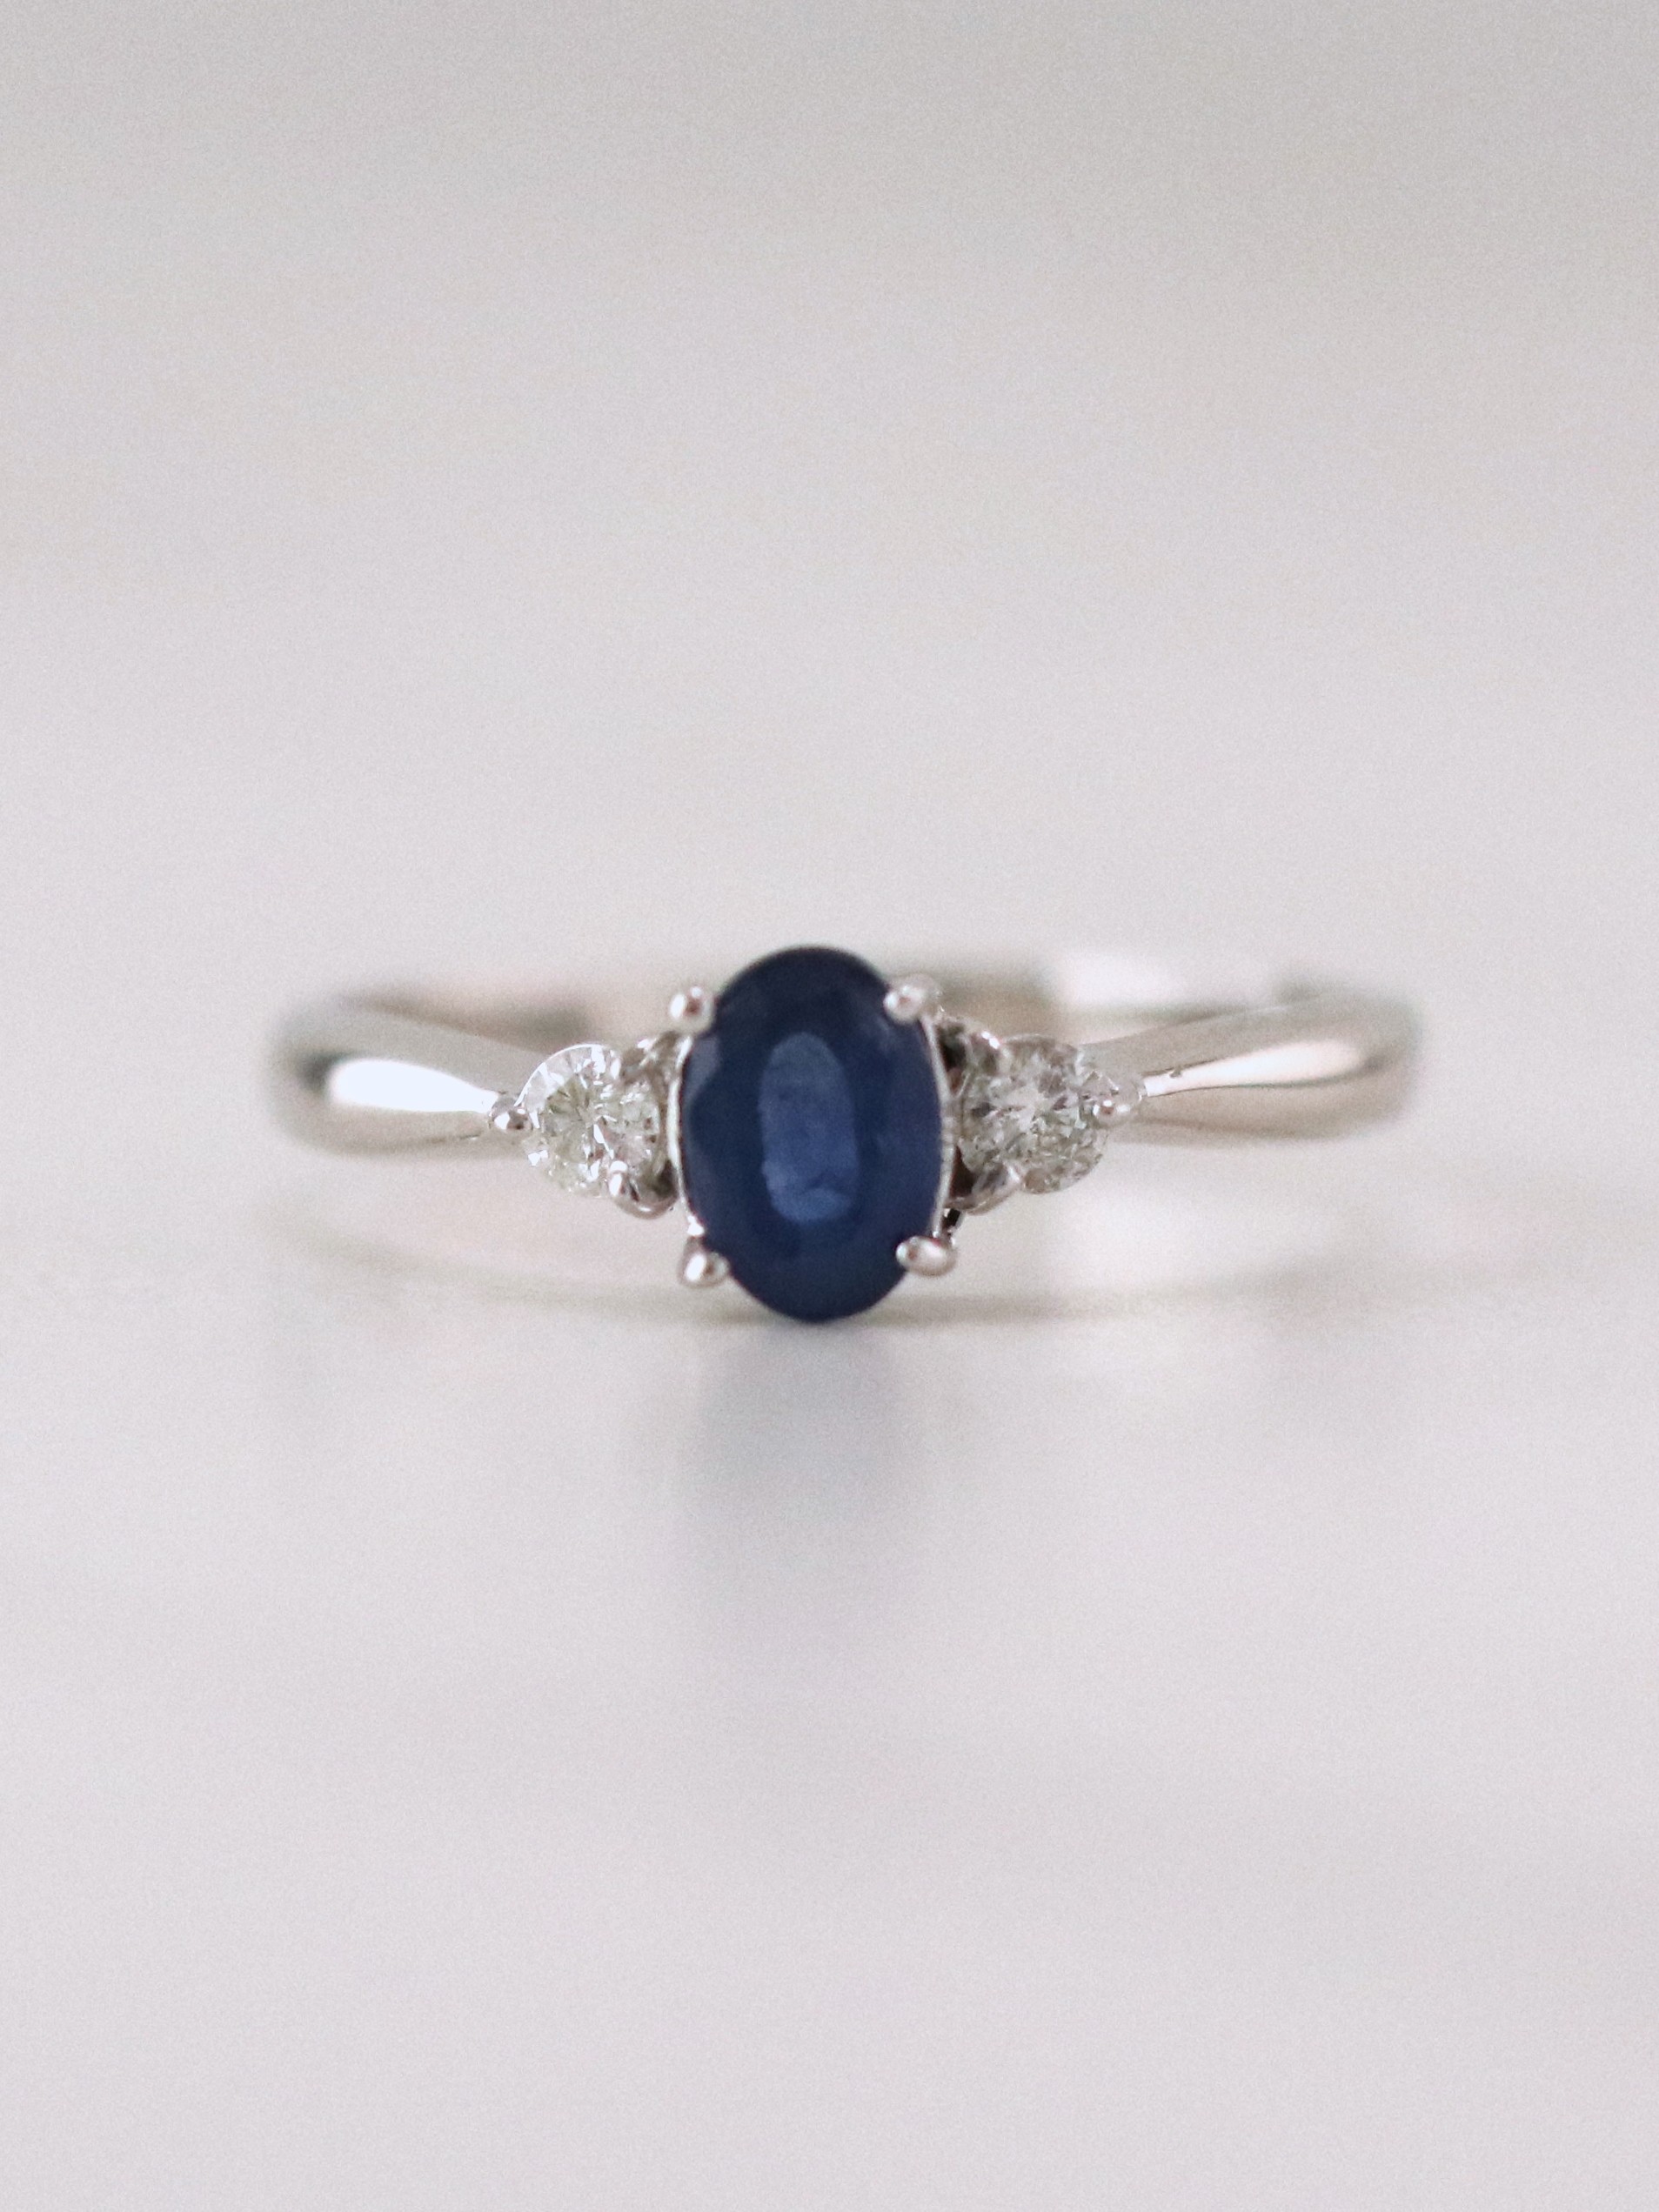 Blue Sapphire and Diamond Engagement Solid 14K White Gold Ring 